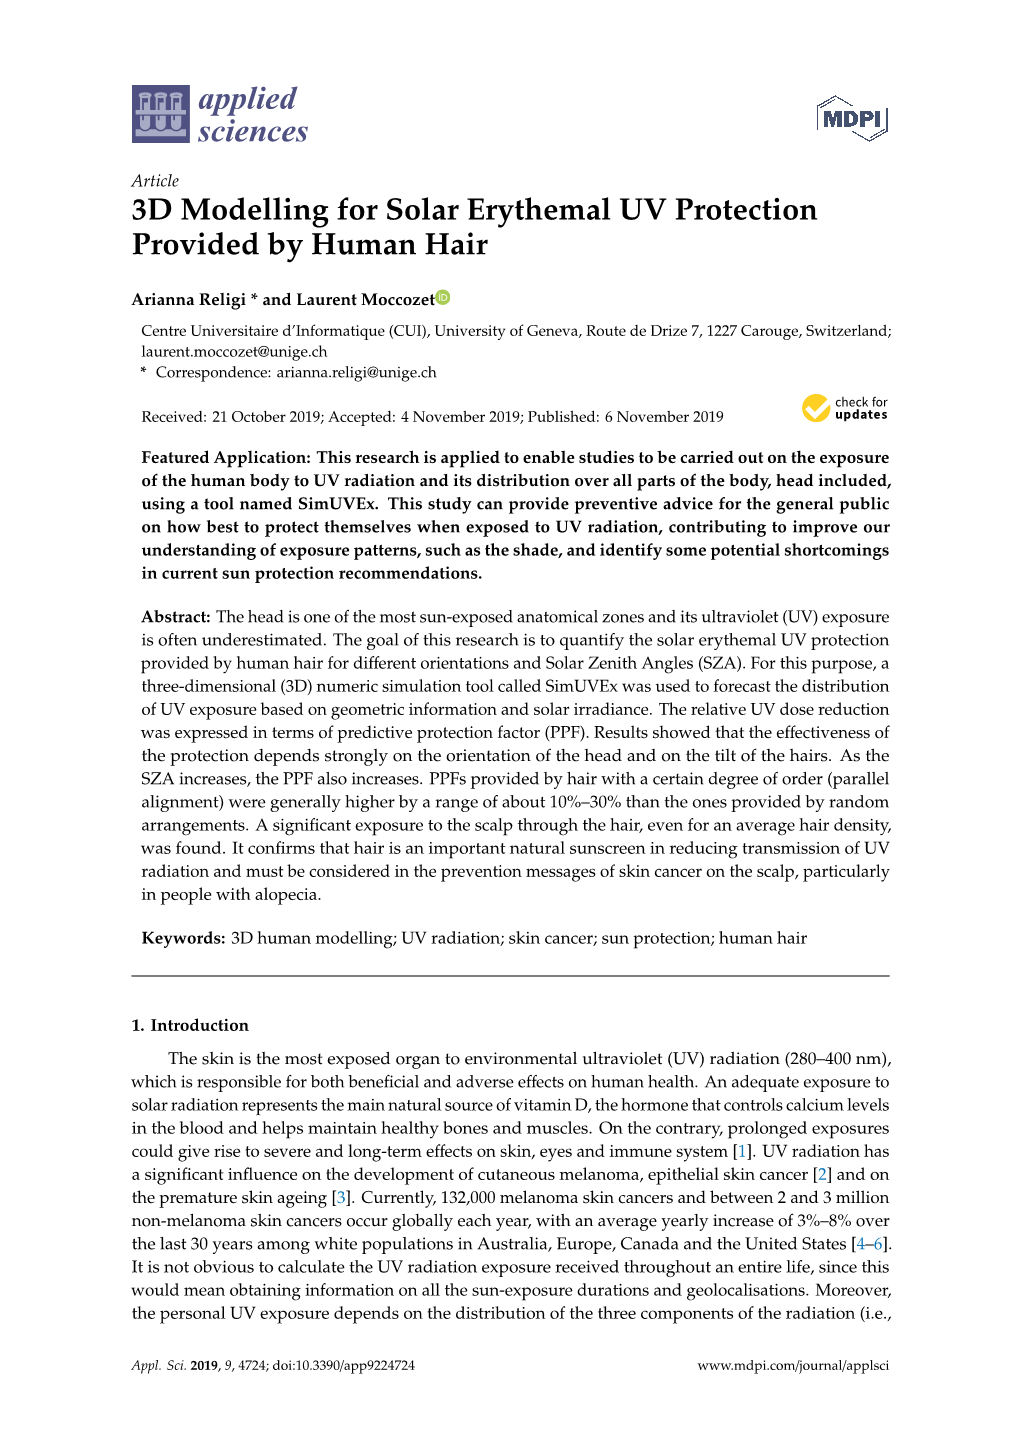 3D Modelling for Solar Erythemal UV Protection Provided by Human Hair